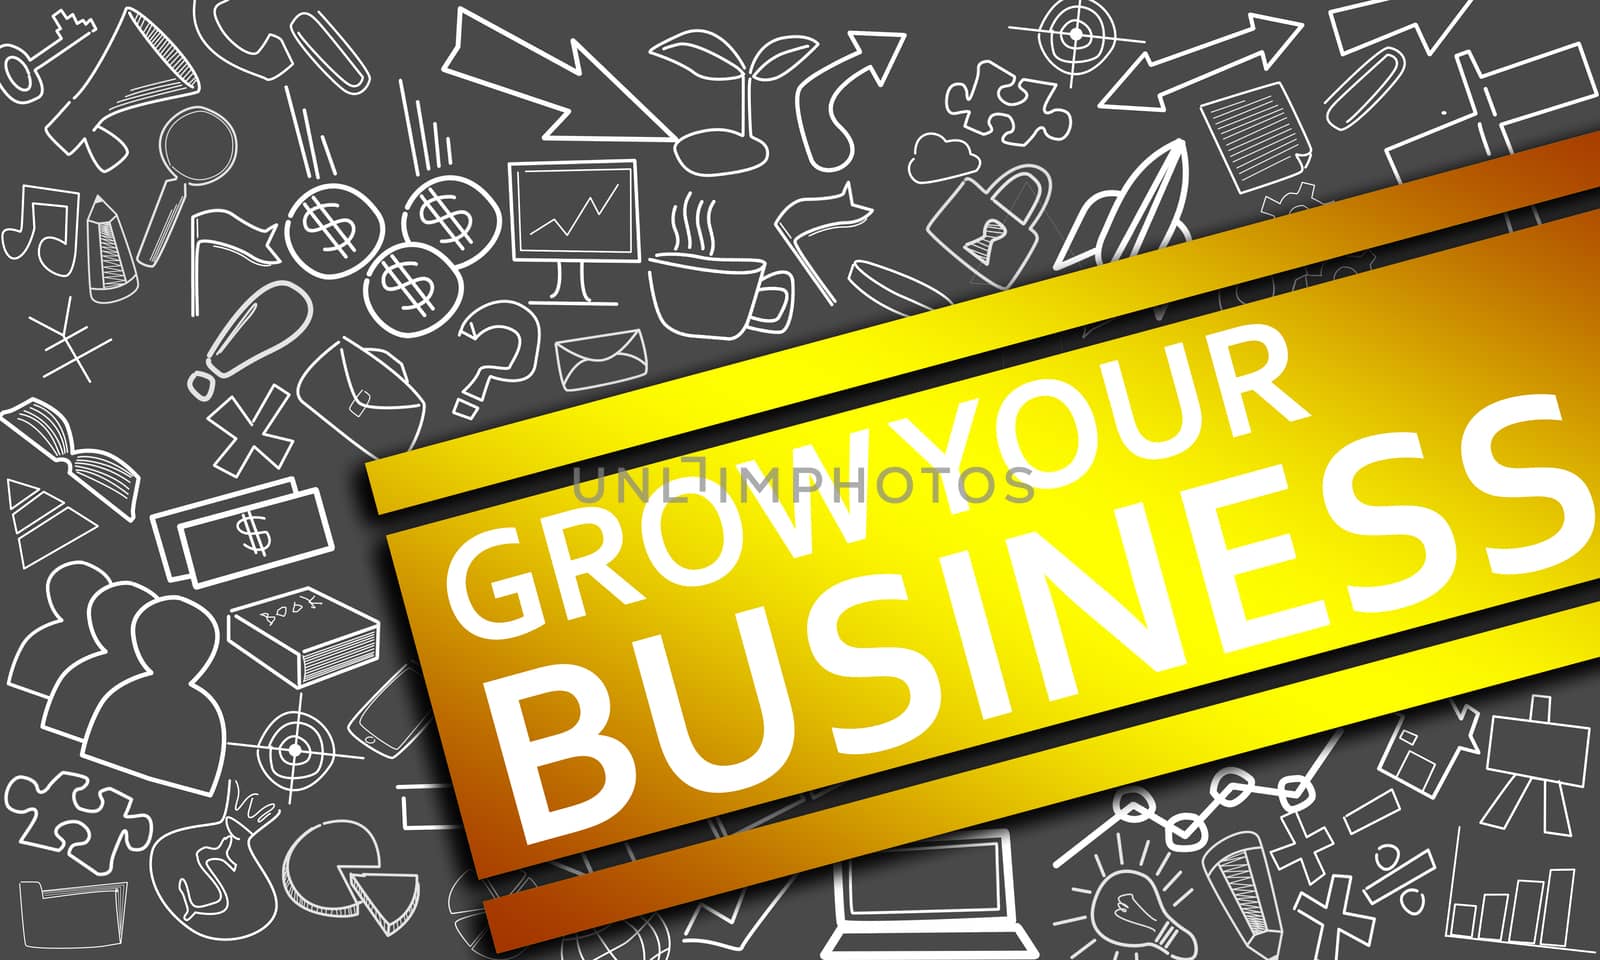 Grow your business concept with creative icon drawings by tang90246